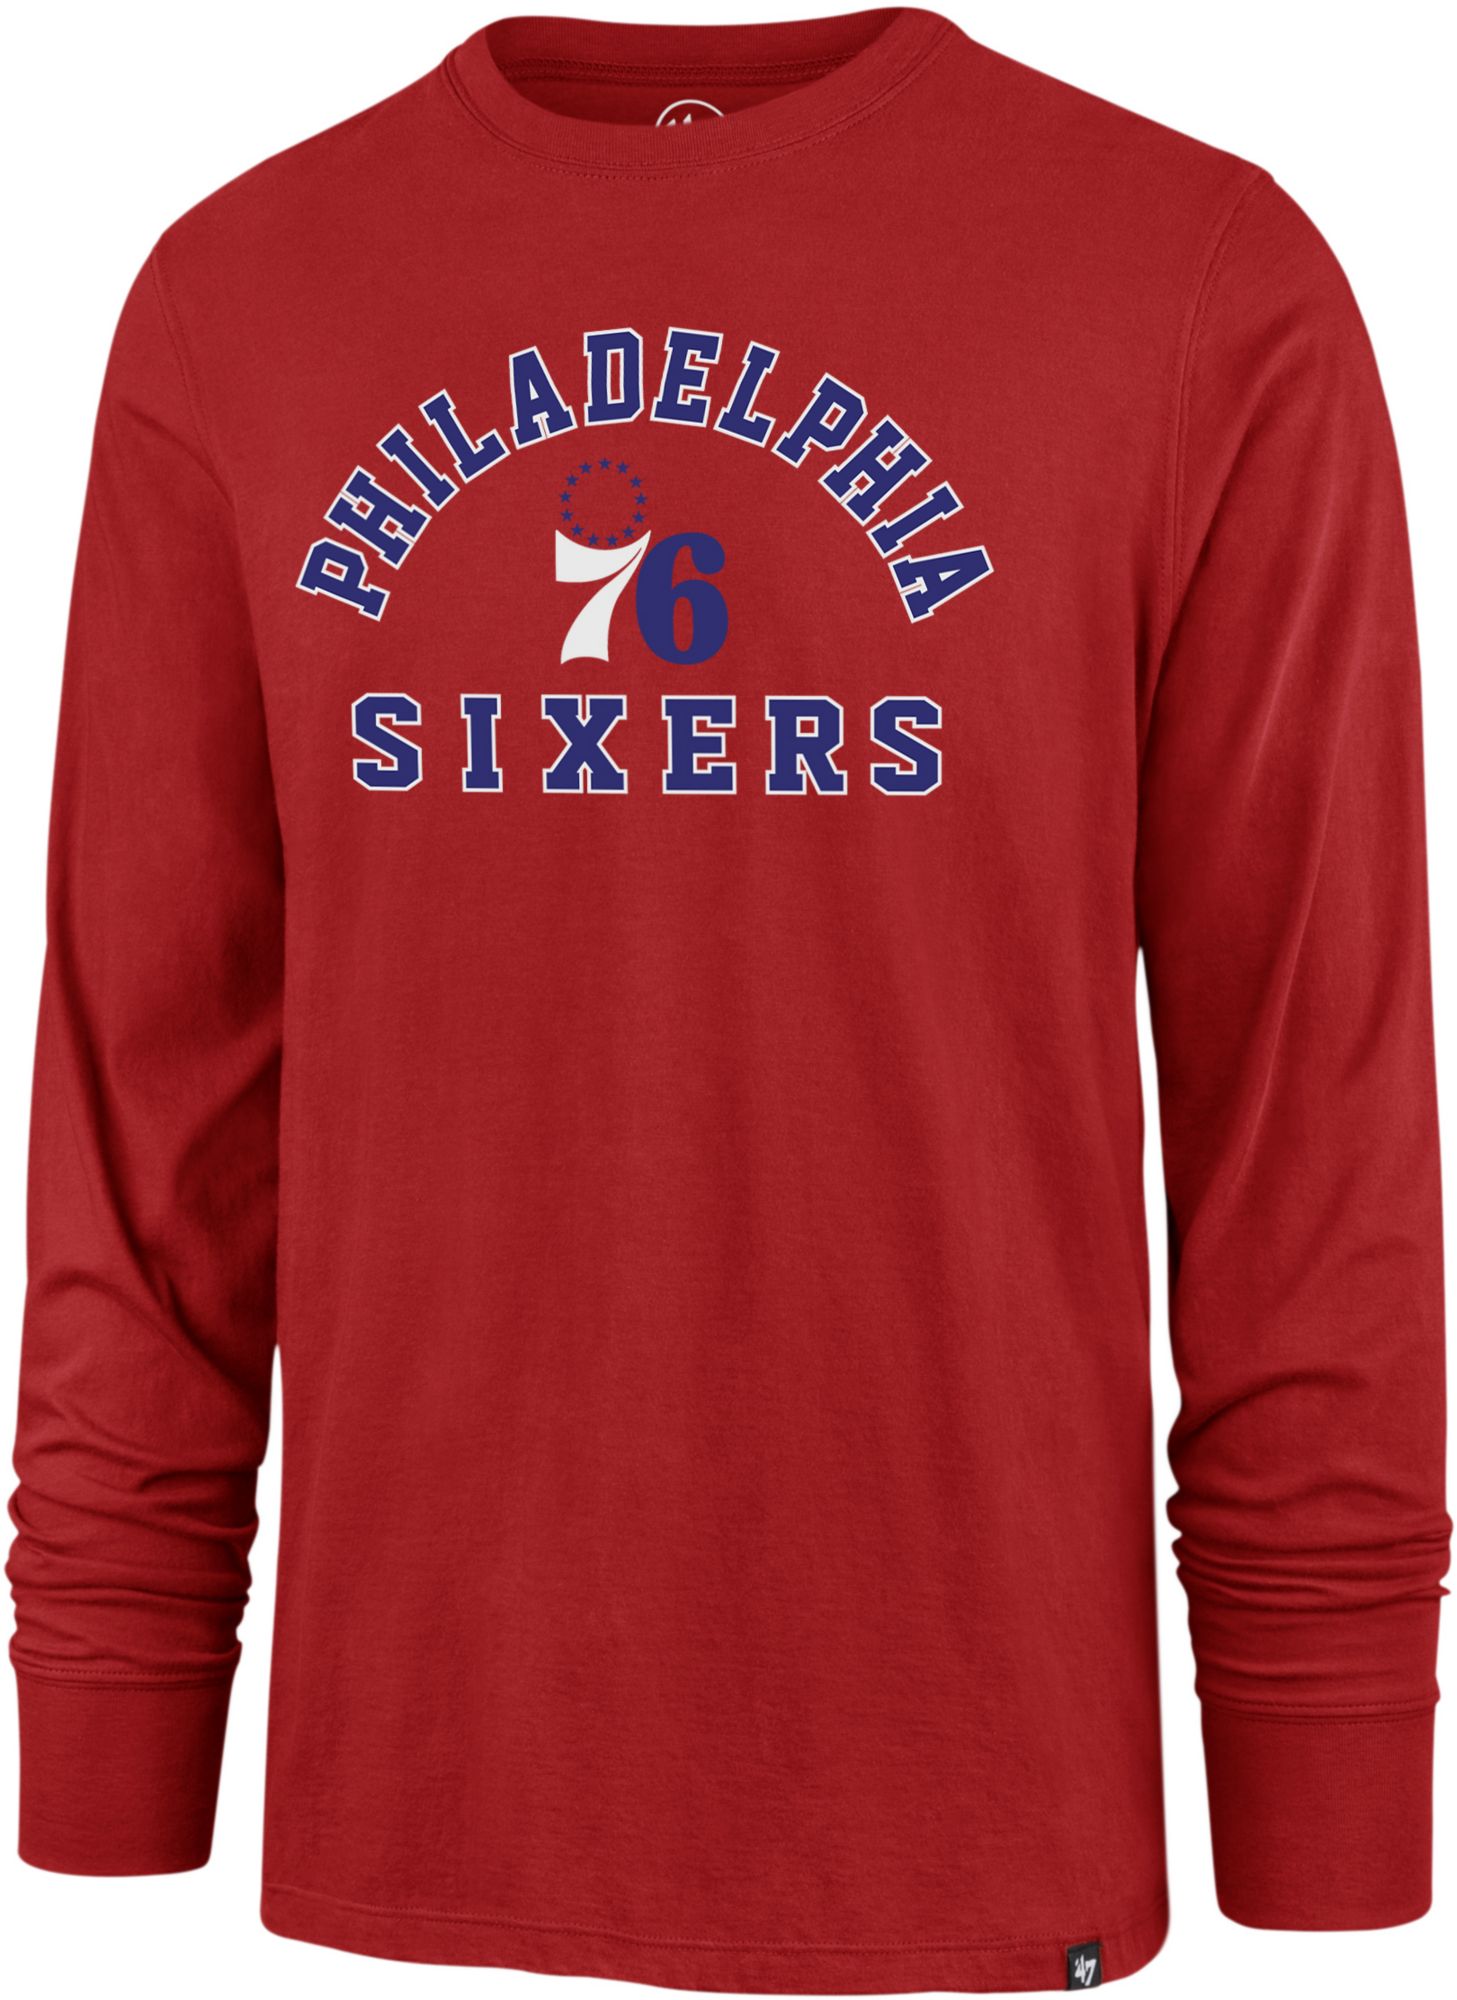 sixers infant jersey